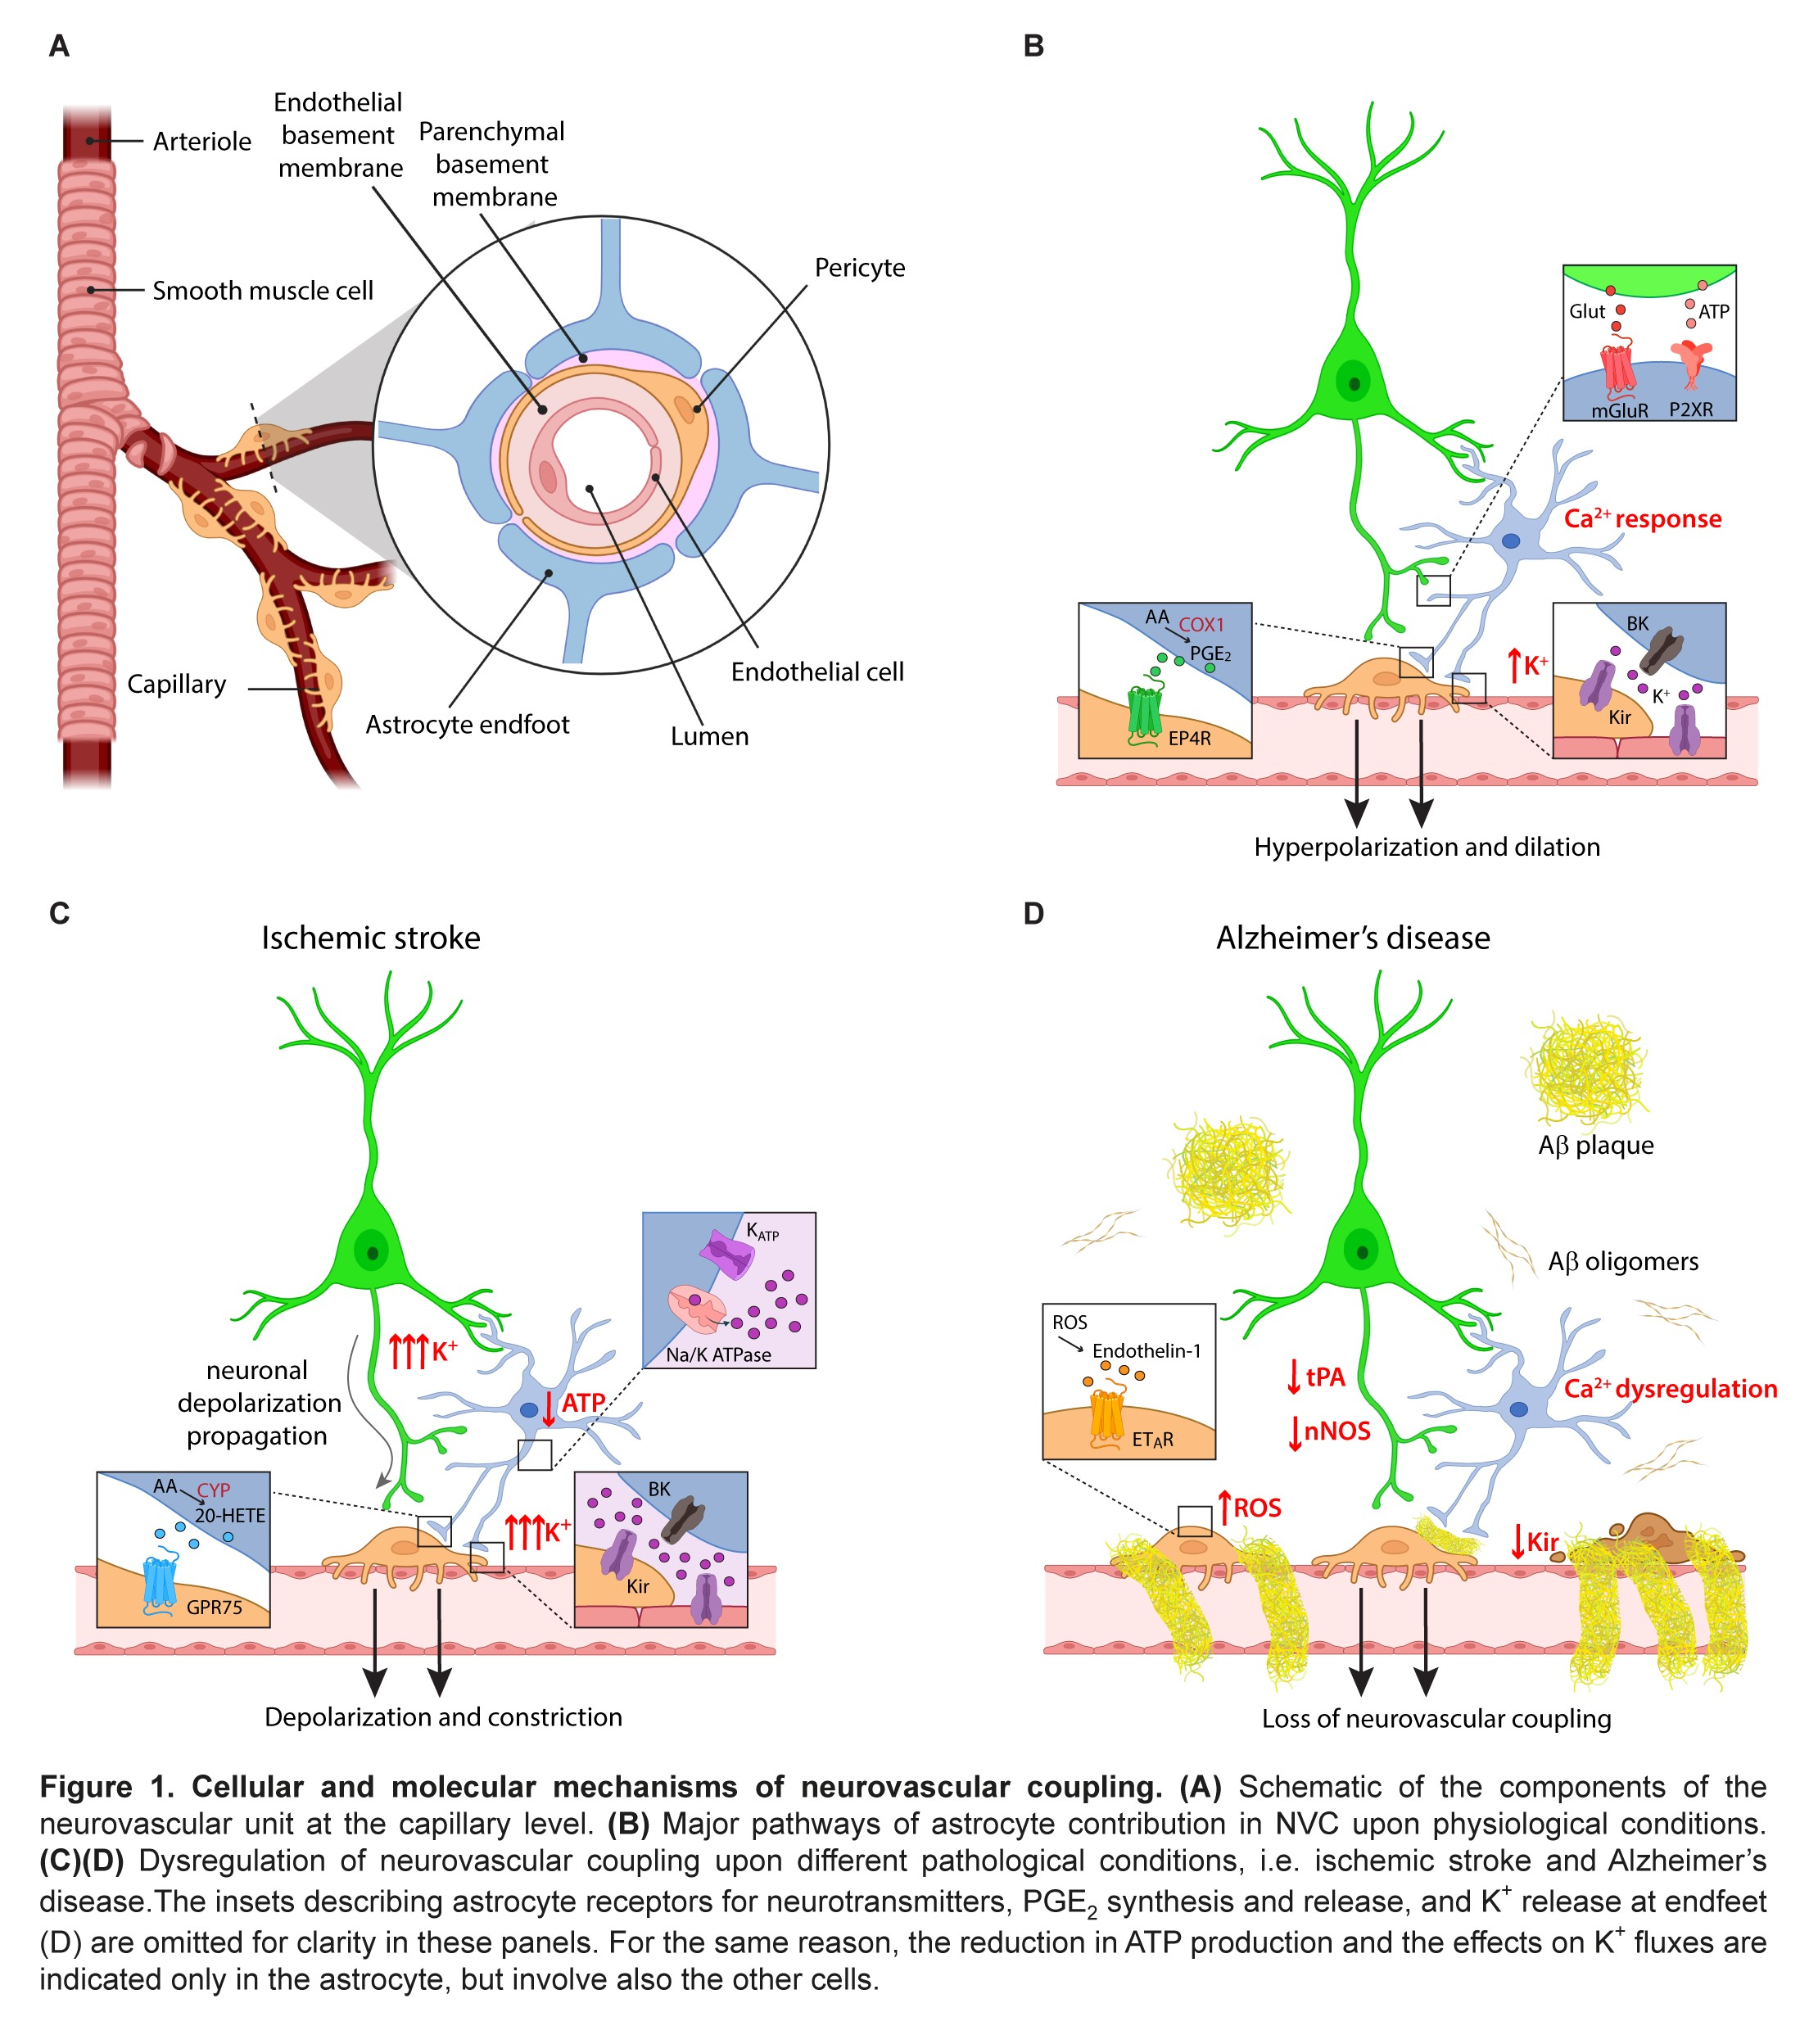 Two decades of astrocytes in neurovascular coupling